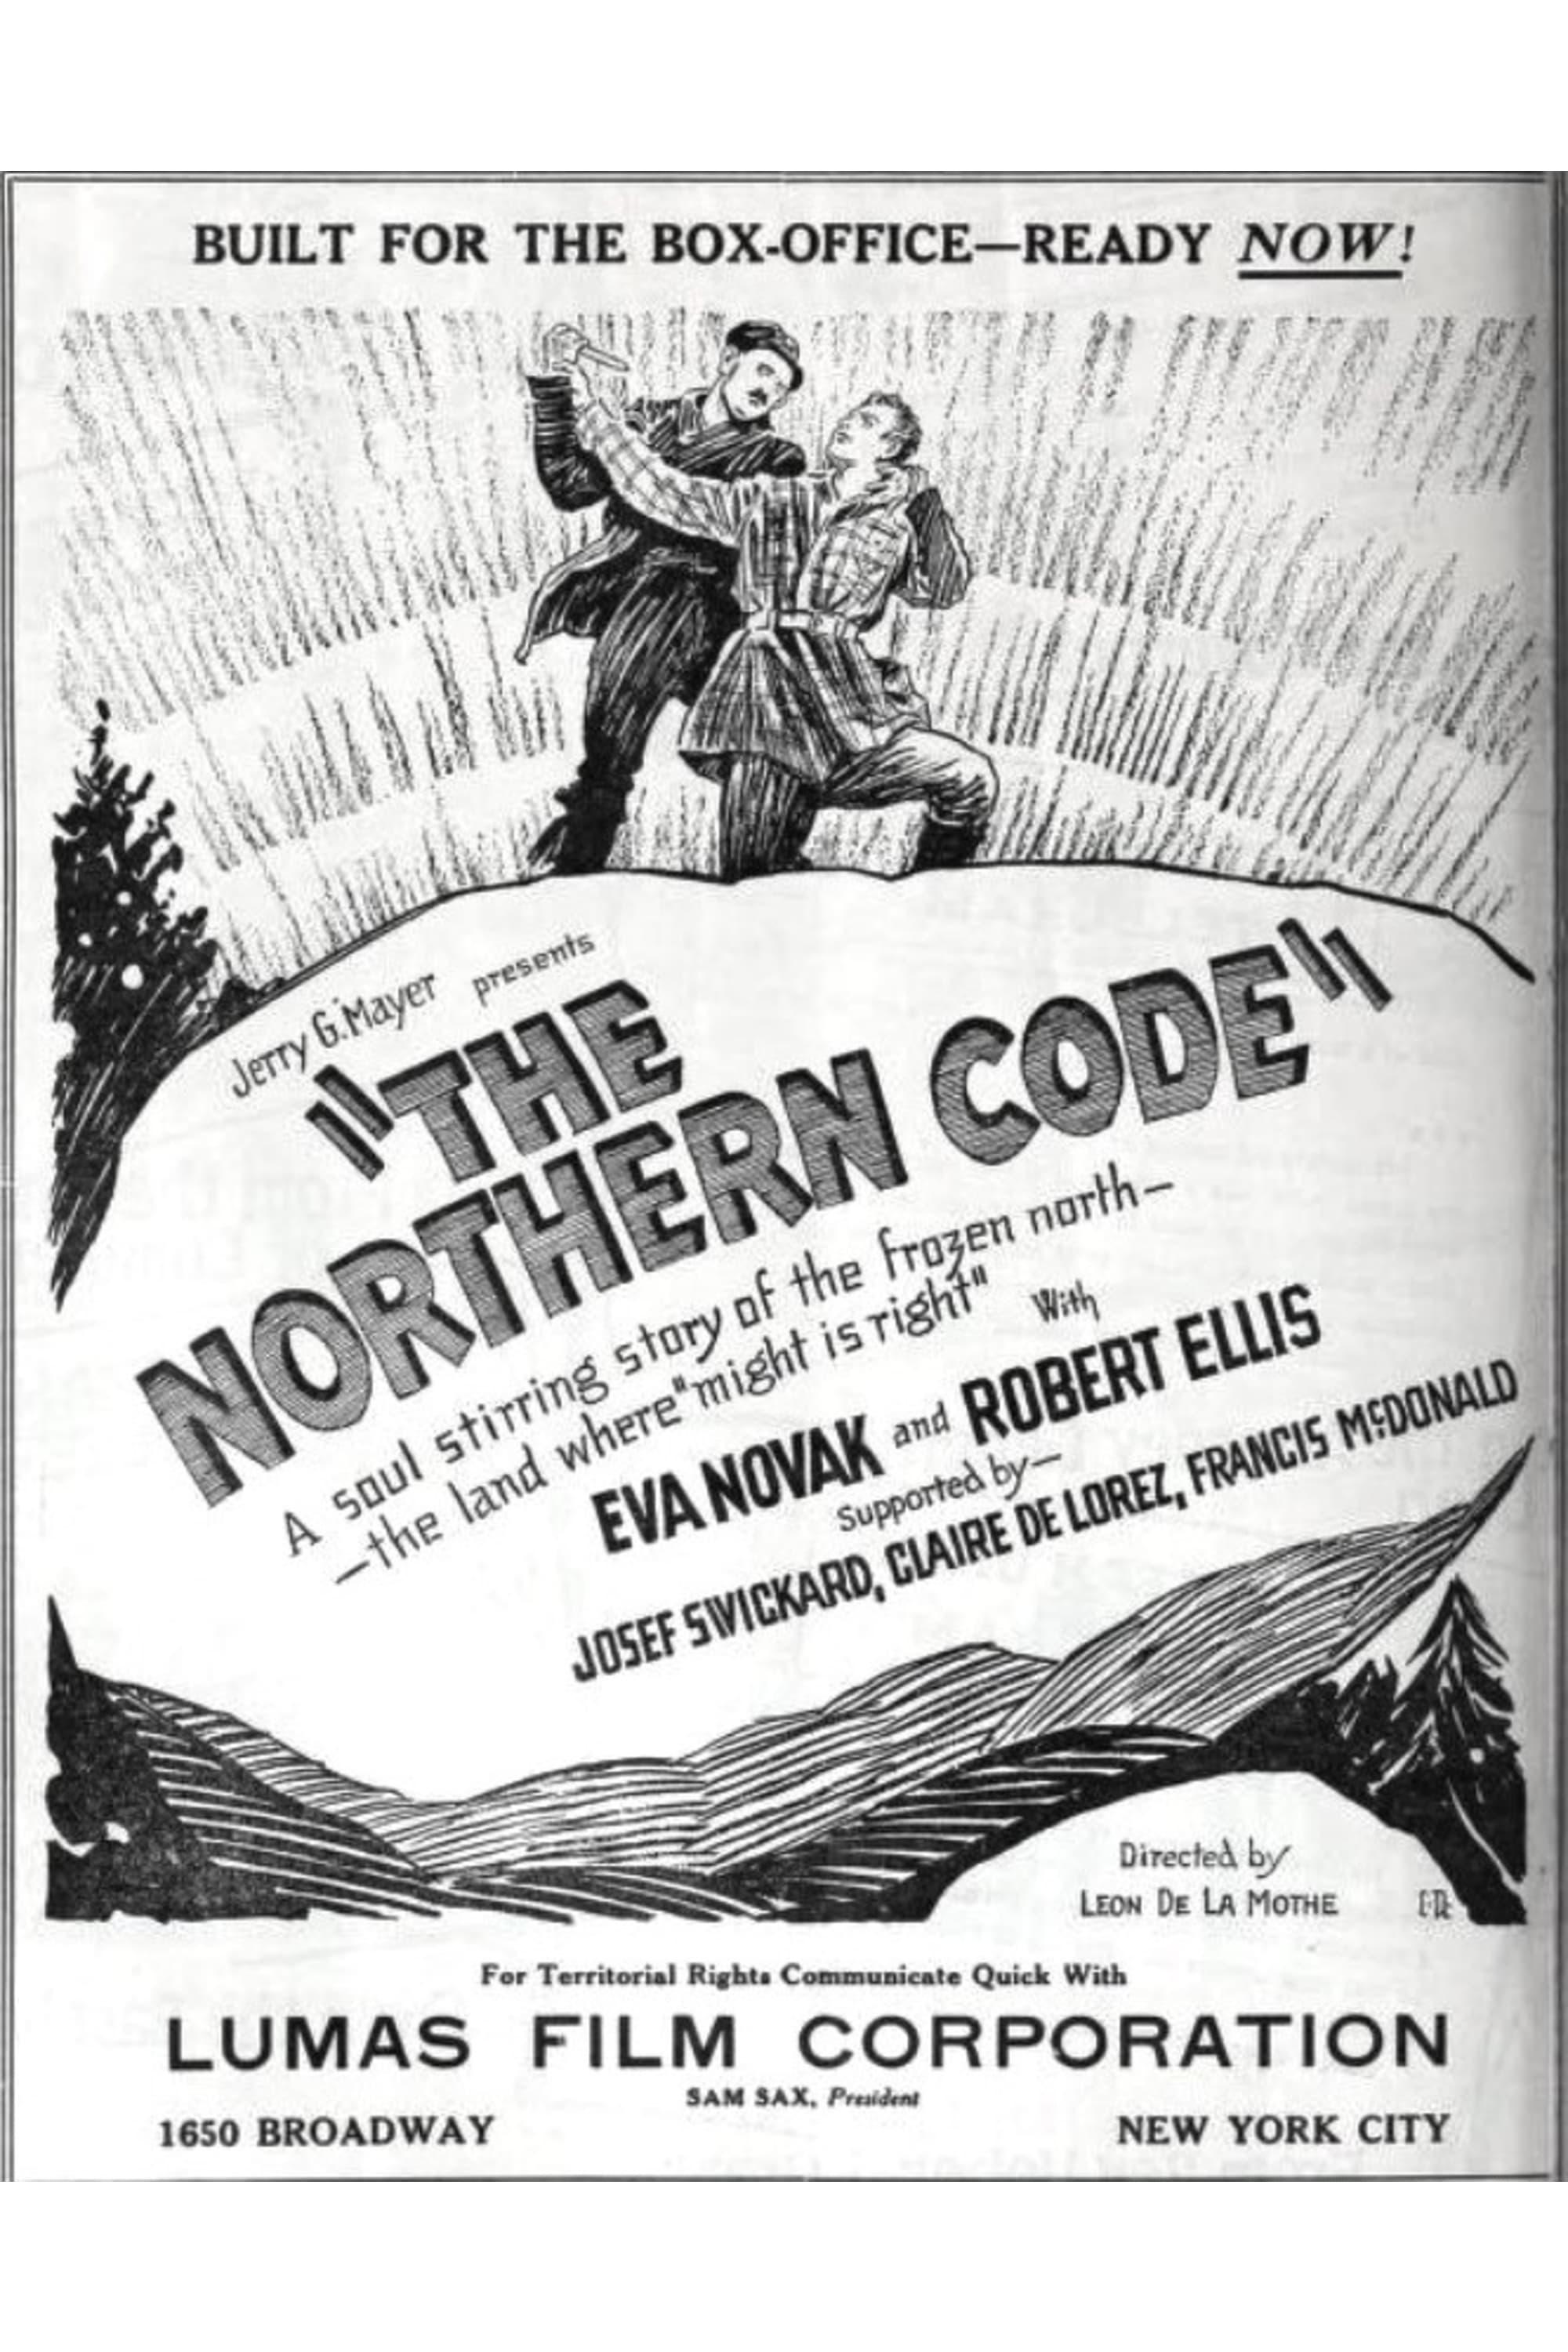 The Northern Code poster